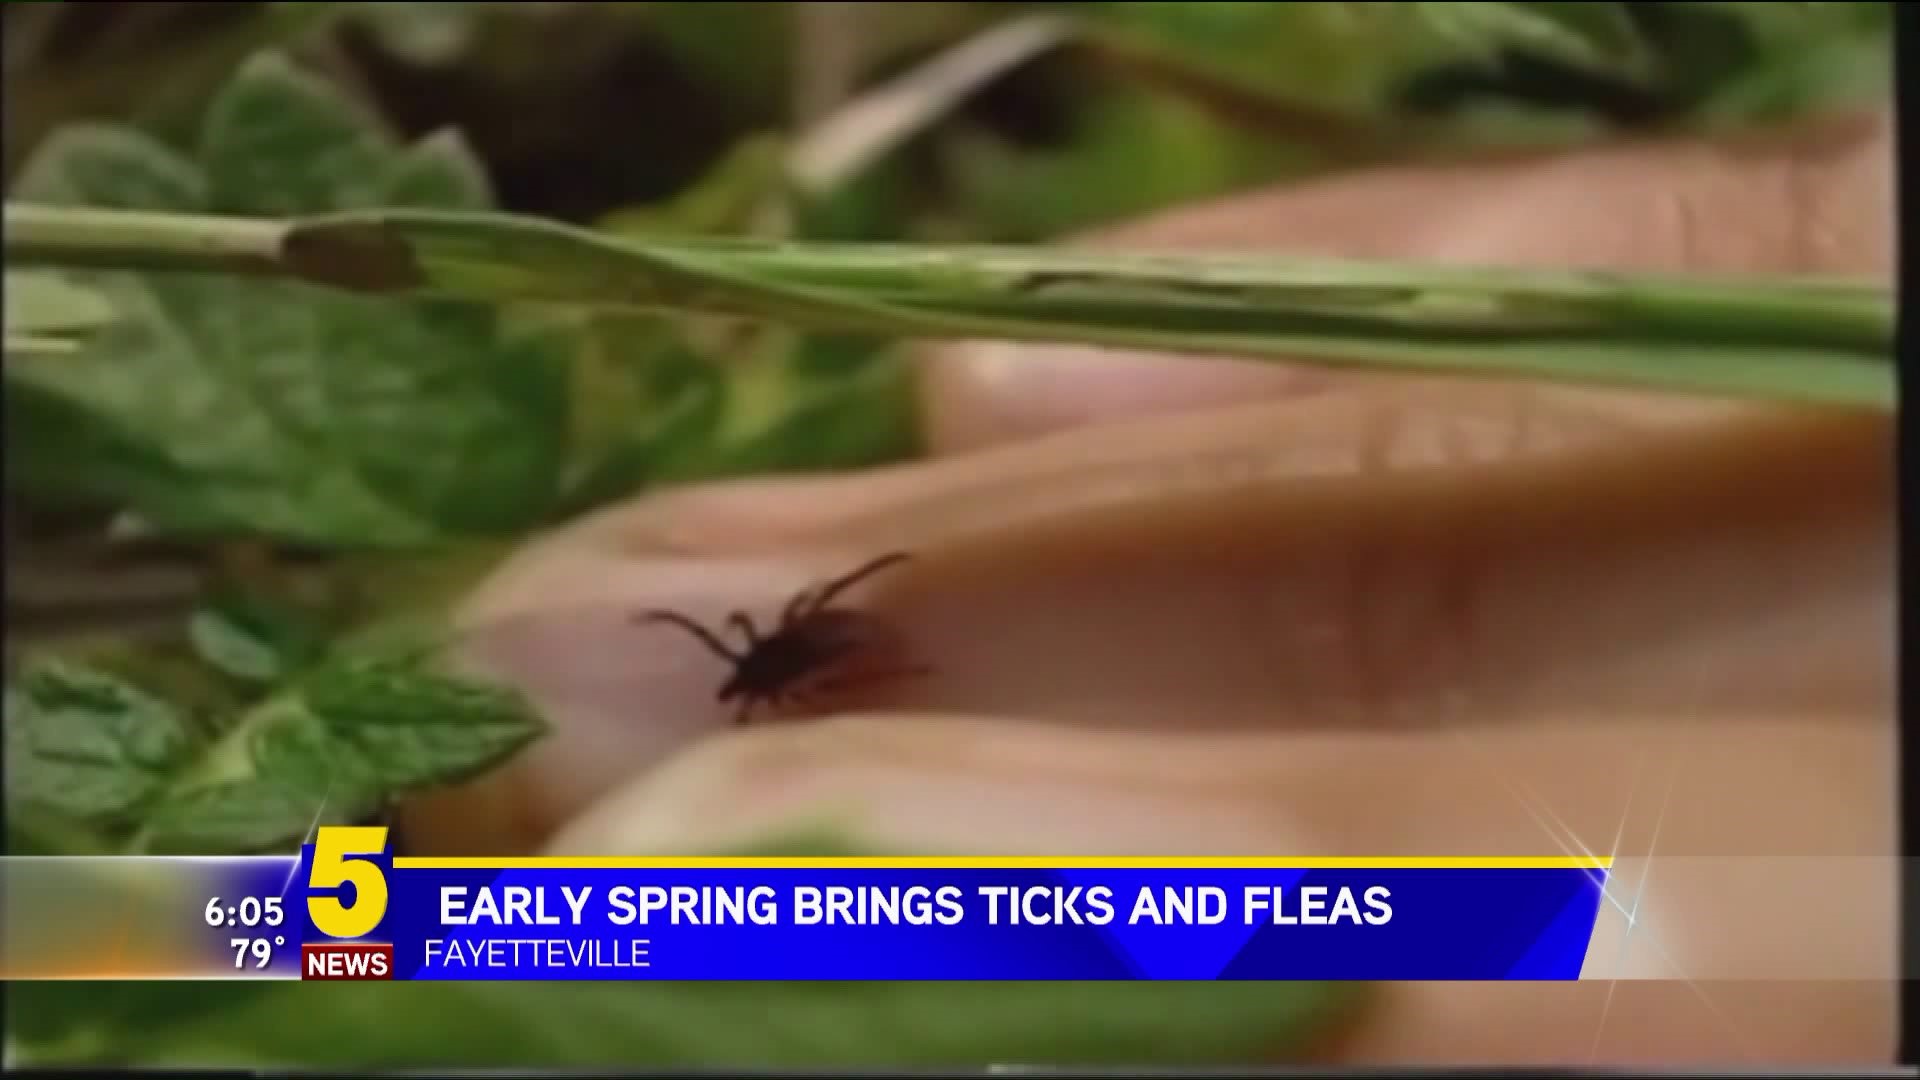 AN EARLY SPRING BRINGS FLEAS AND TICKS